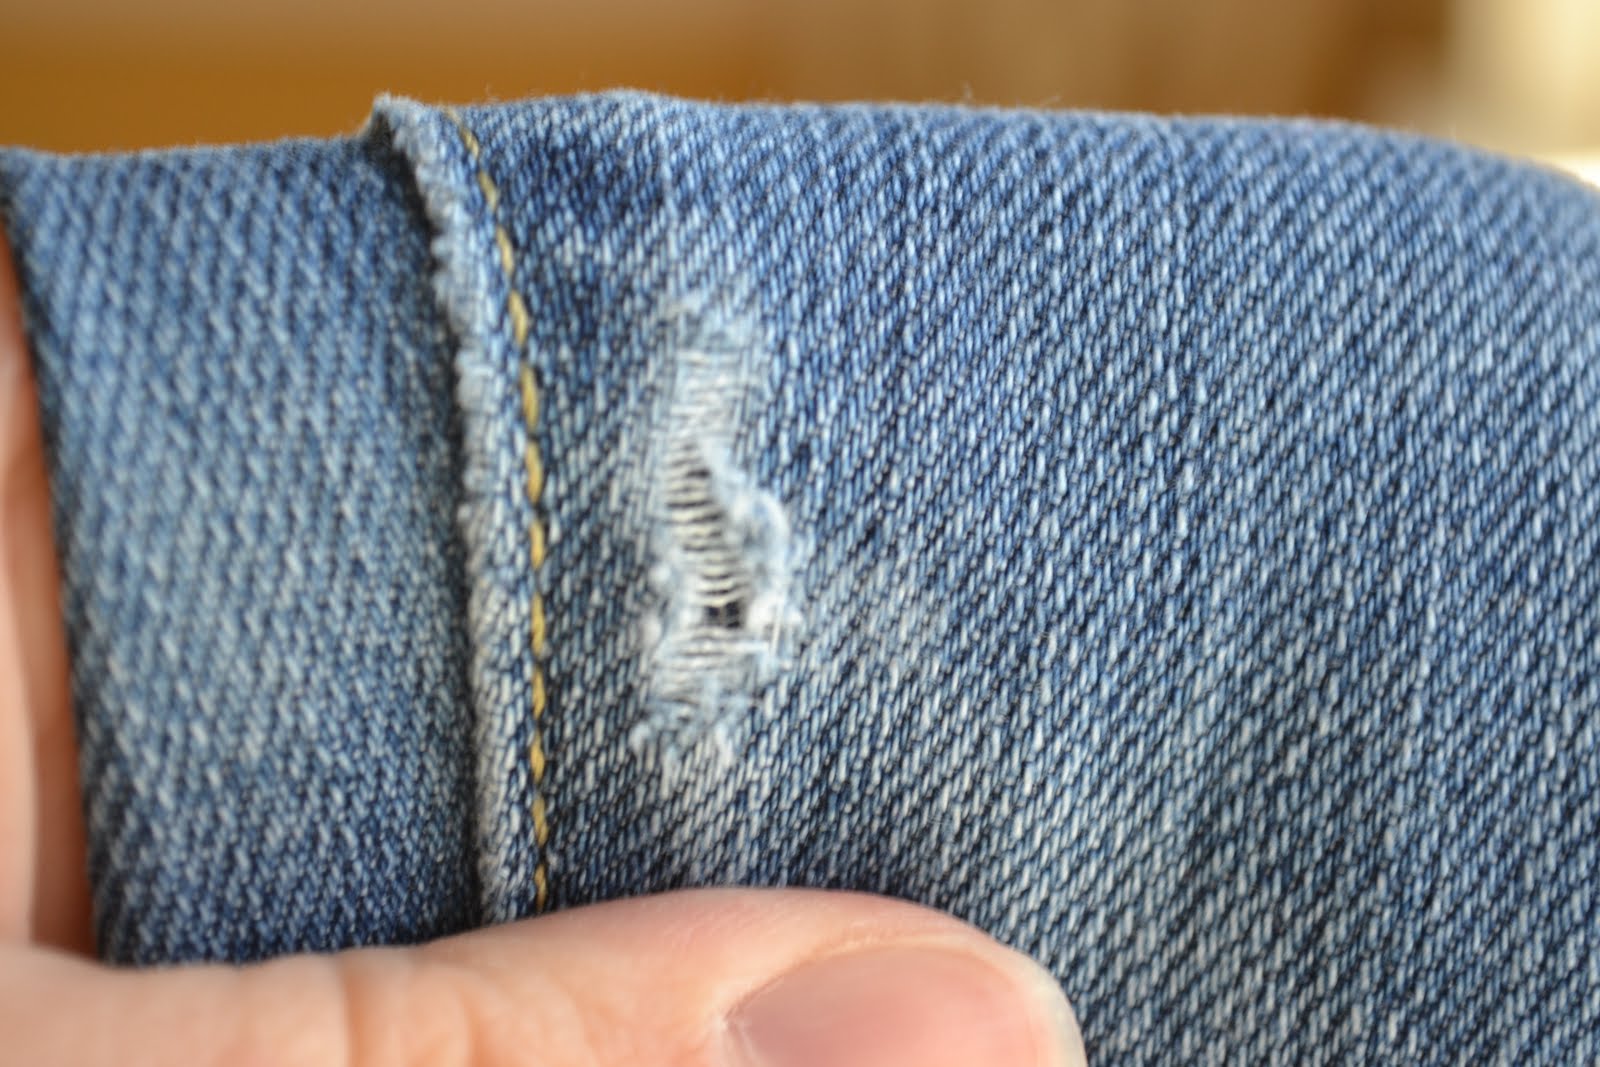 The hole on the seam with the mending tape on the inside of the jeans,